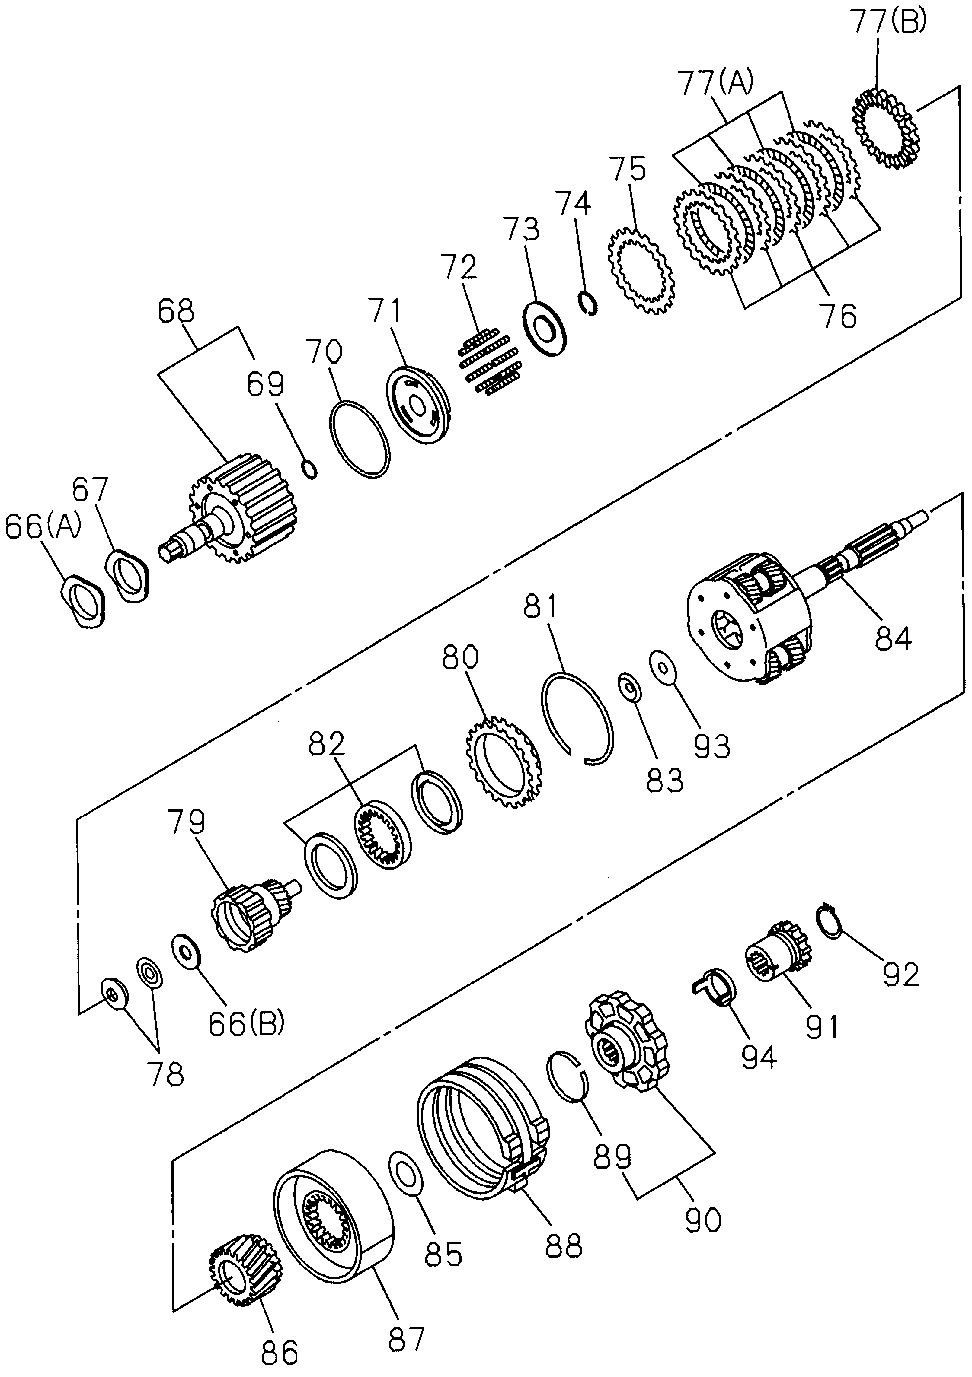 8-96017-348-0 - CARRIER ASSY., PLANETARY